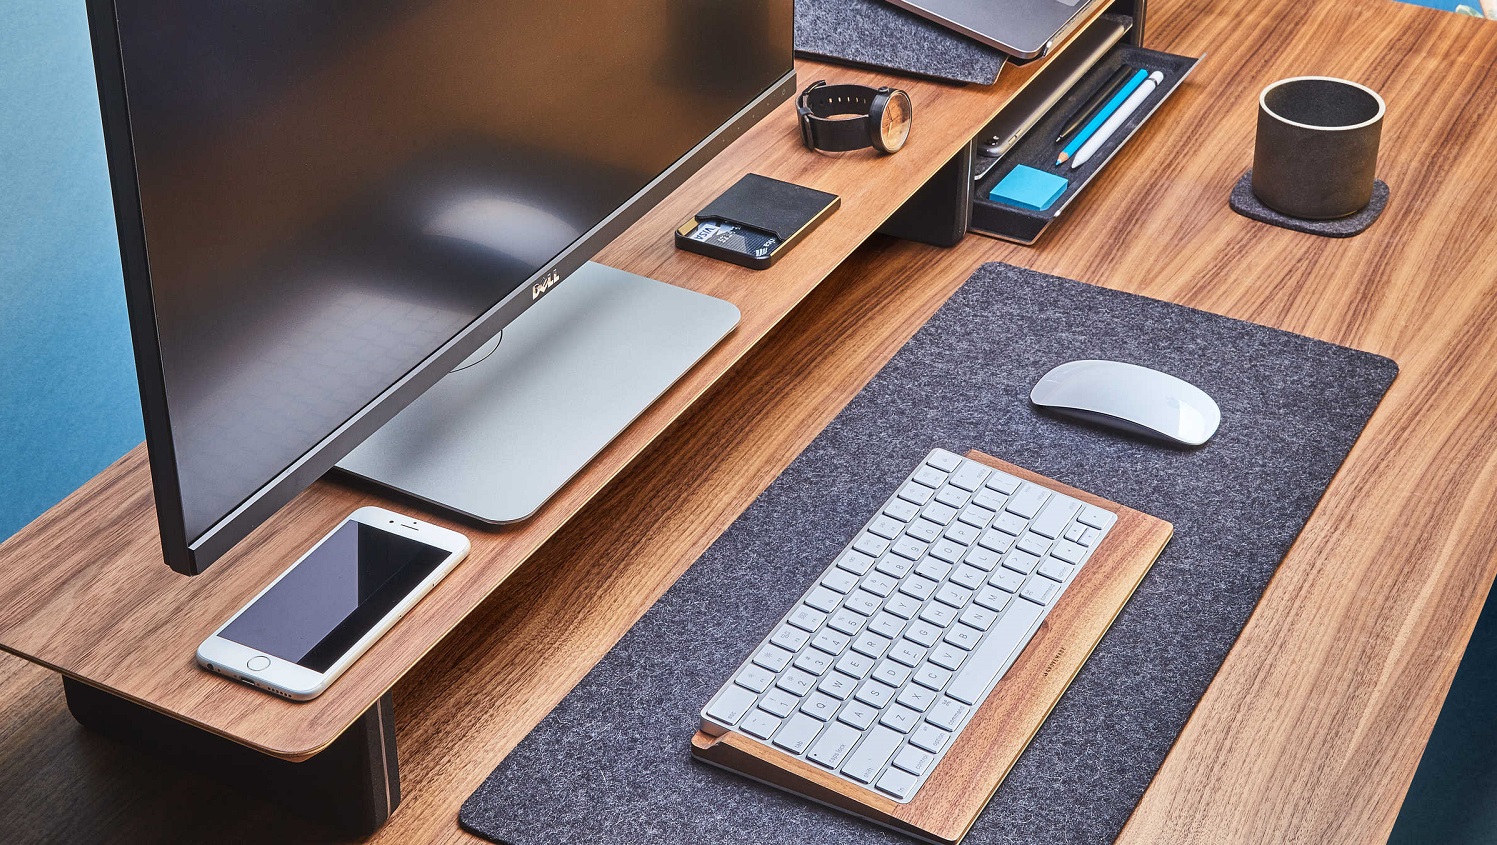 Grovemade Desk Shelf System is the Handsomest Way to Declutter